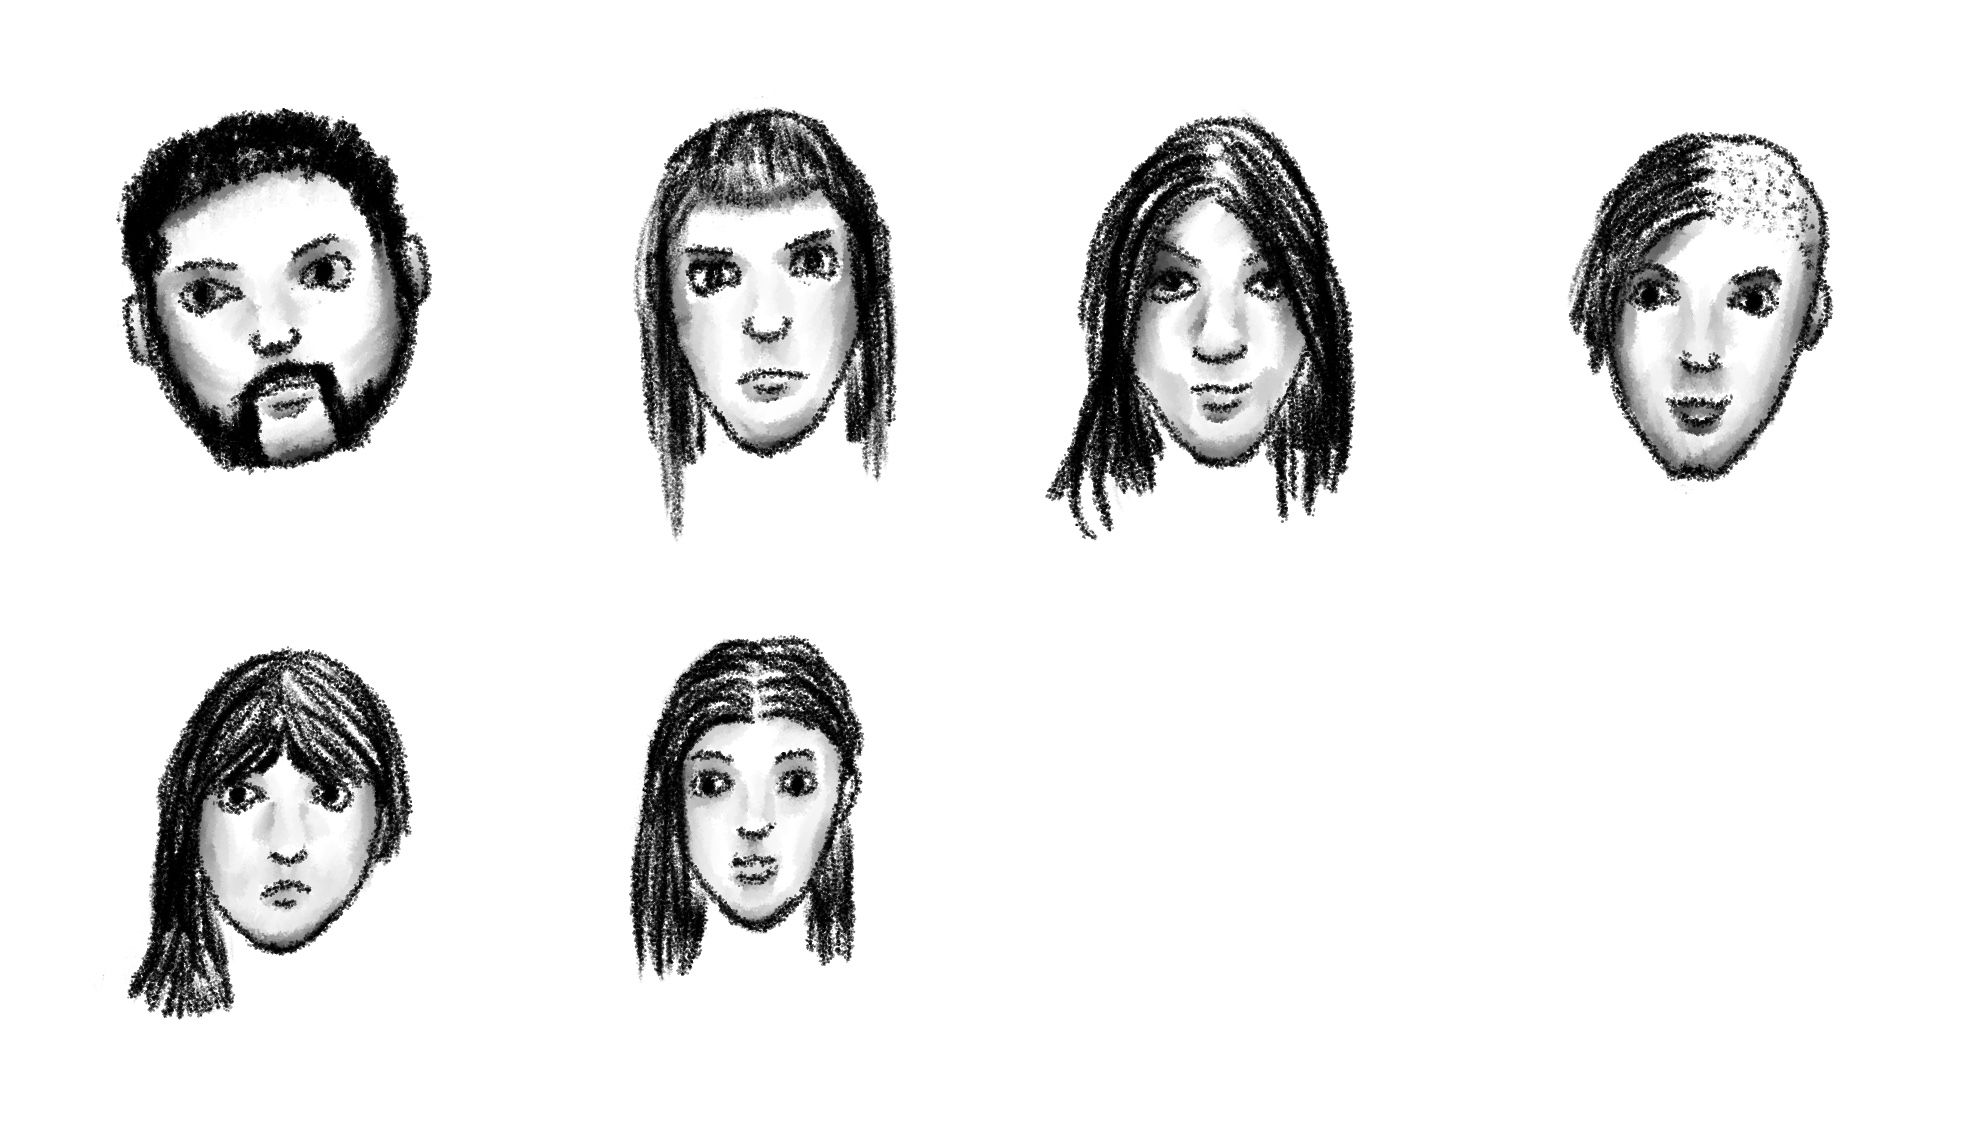 A selection of basic black and white cartoon-looking sketches of people heads. Six in total, five female and one male with a handlebar moustache.